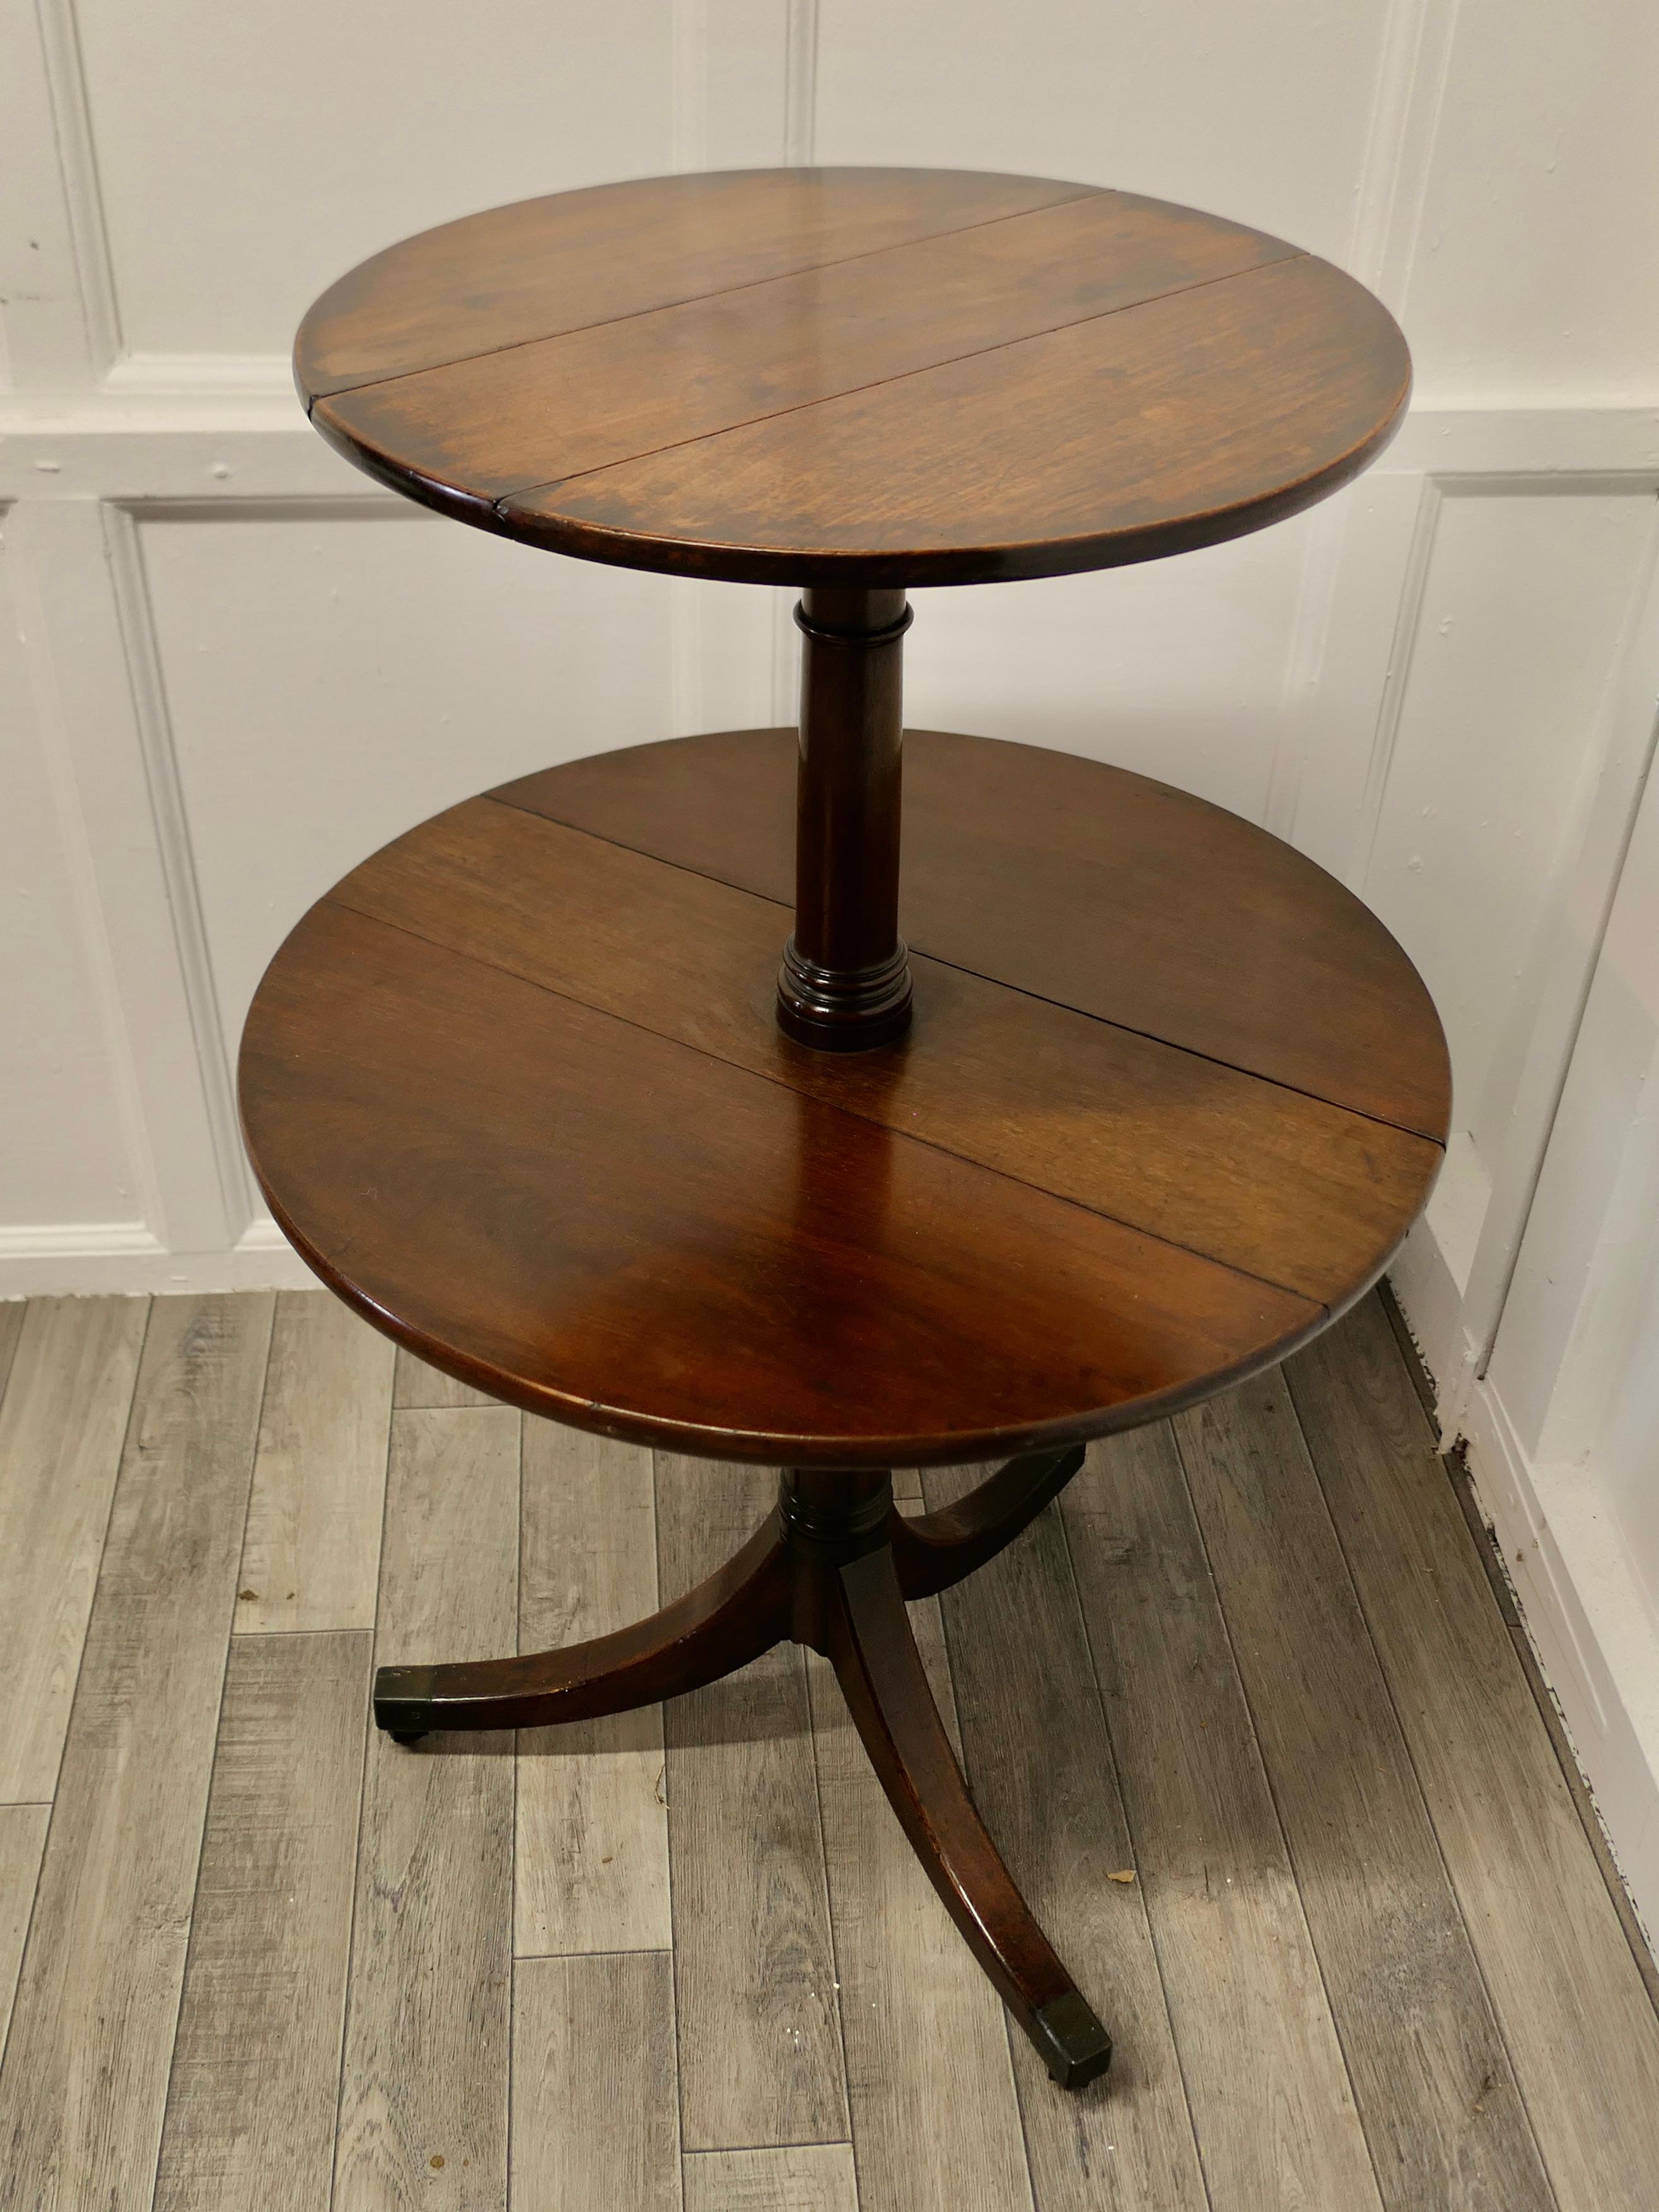 Victorian Walnut Gueridon Cake Stand or Dumb Waiter     In Good Condition For Sale In Chillerton, Isle of Wight